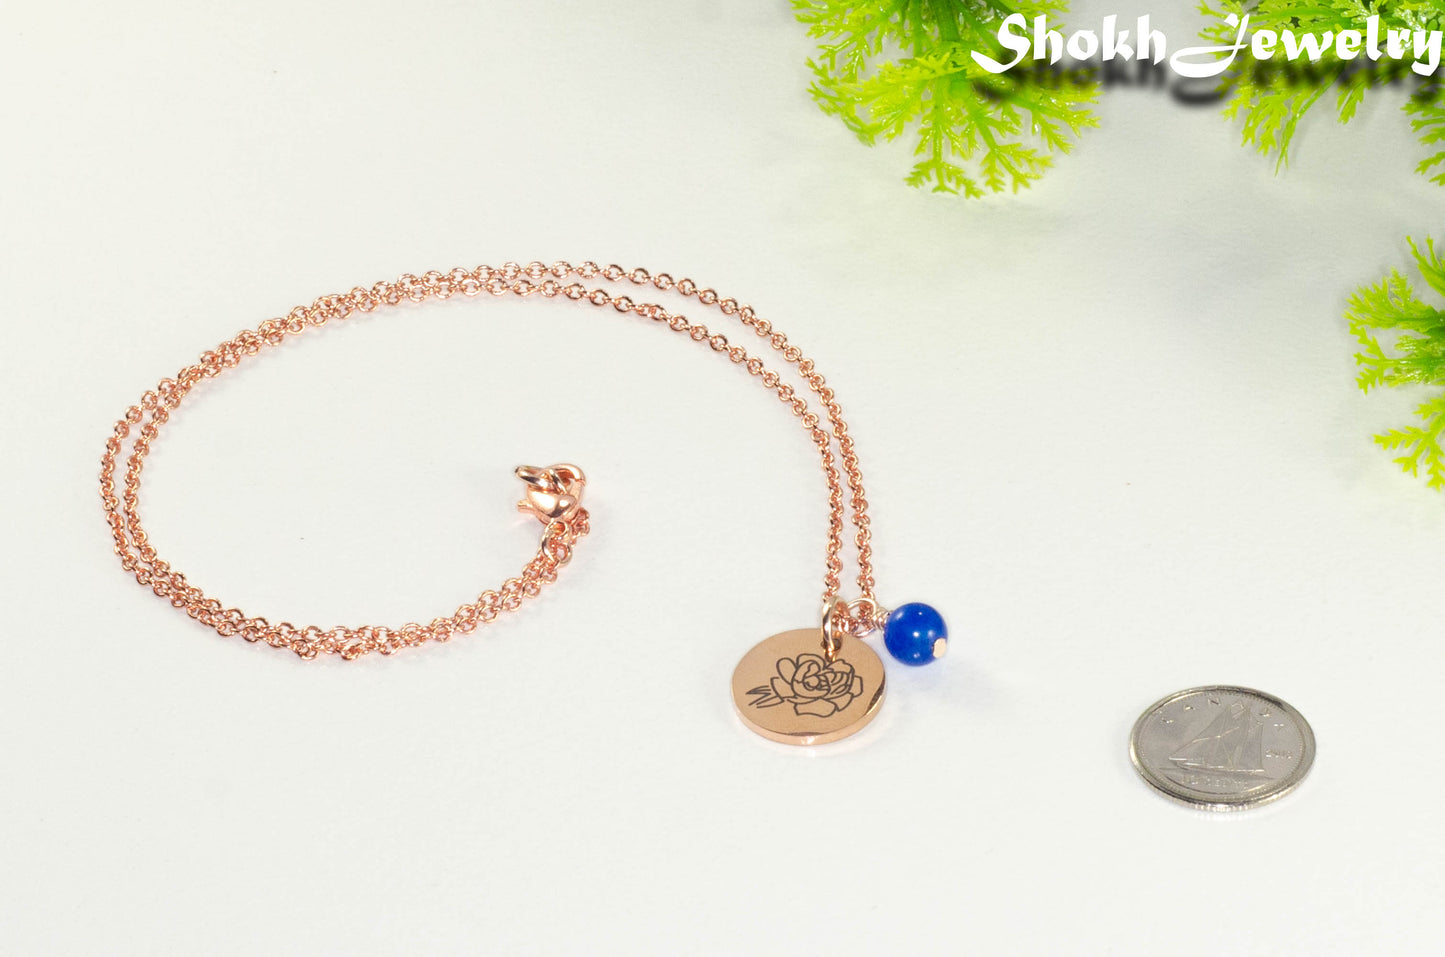 Rose Gold Plated September Birth Flower Necklace with Sapphire Birthstone Pendant beside a dime.